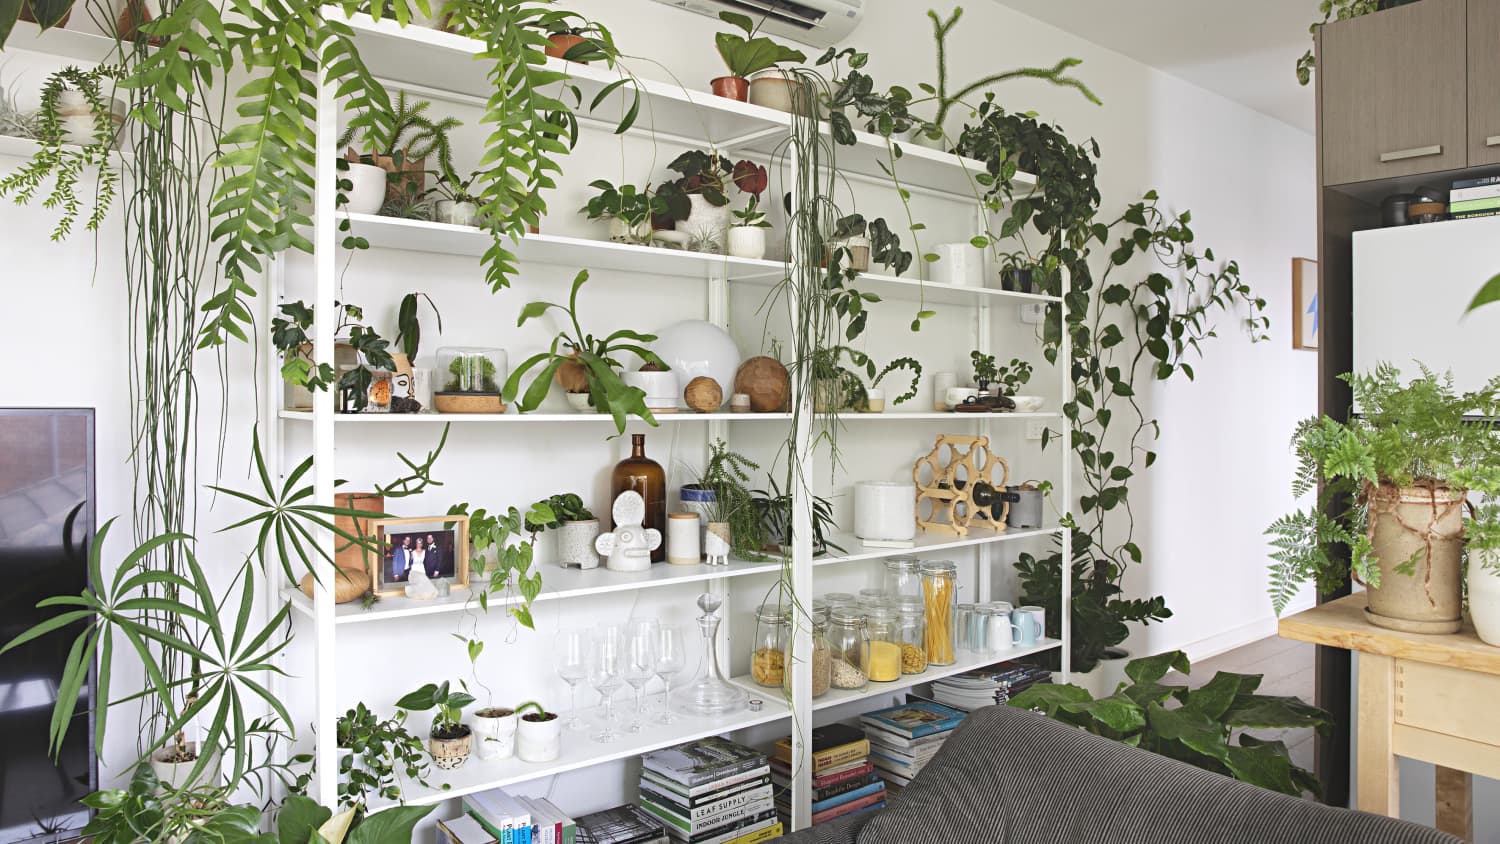 Gallery How to Display Houseplants 20 of Our Favorite Plant Display Ideas ... is free HD wallpaper.